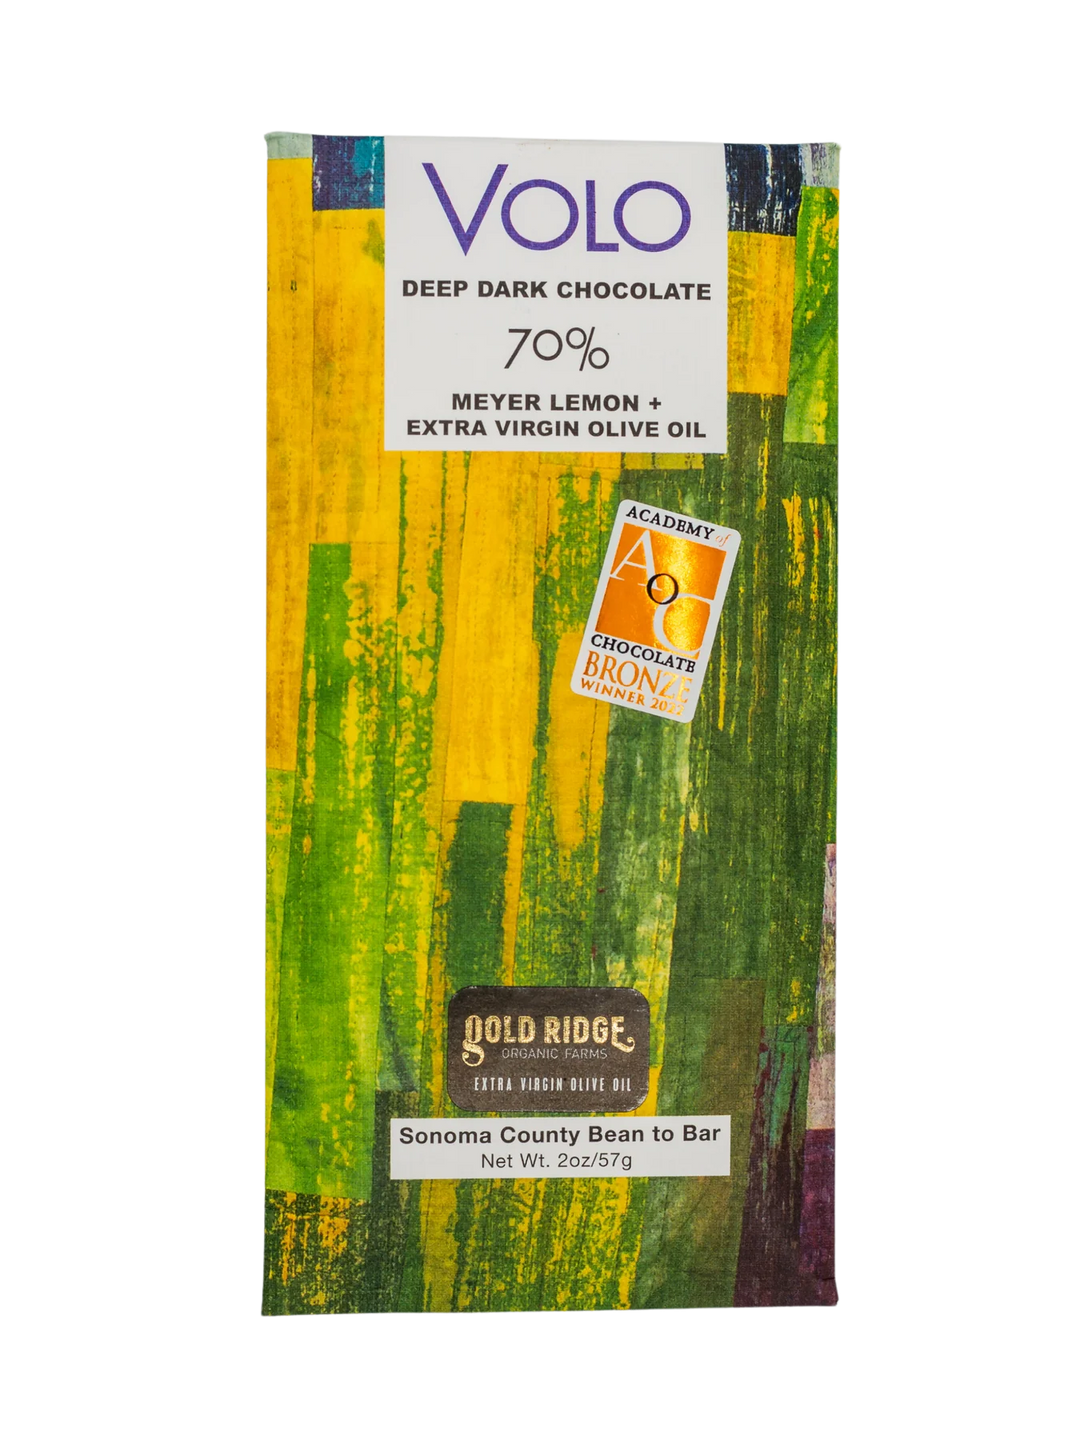 Image of Volo 70% Dark Chocolate with Meyer Lemon and Extra Virgin Olive Oil